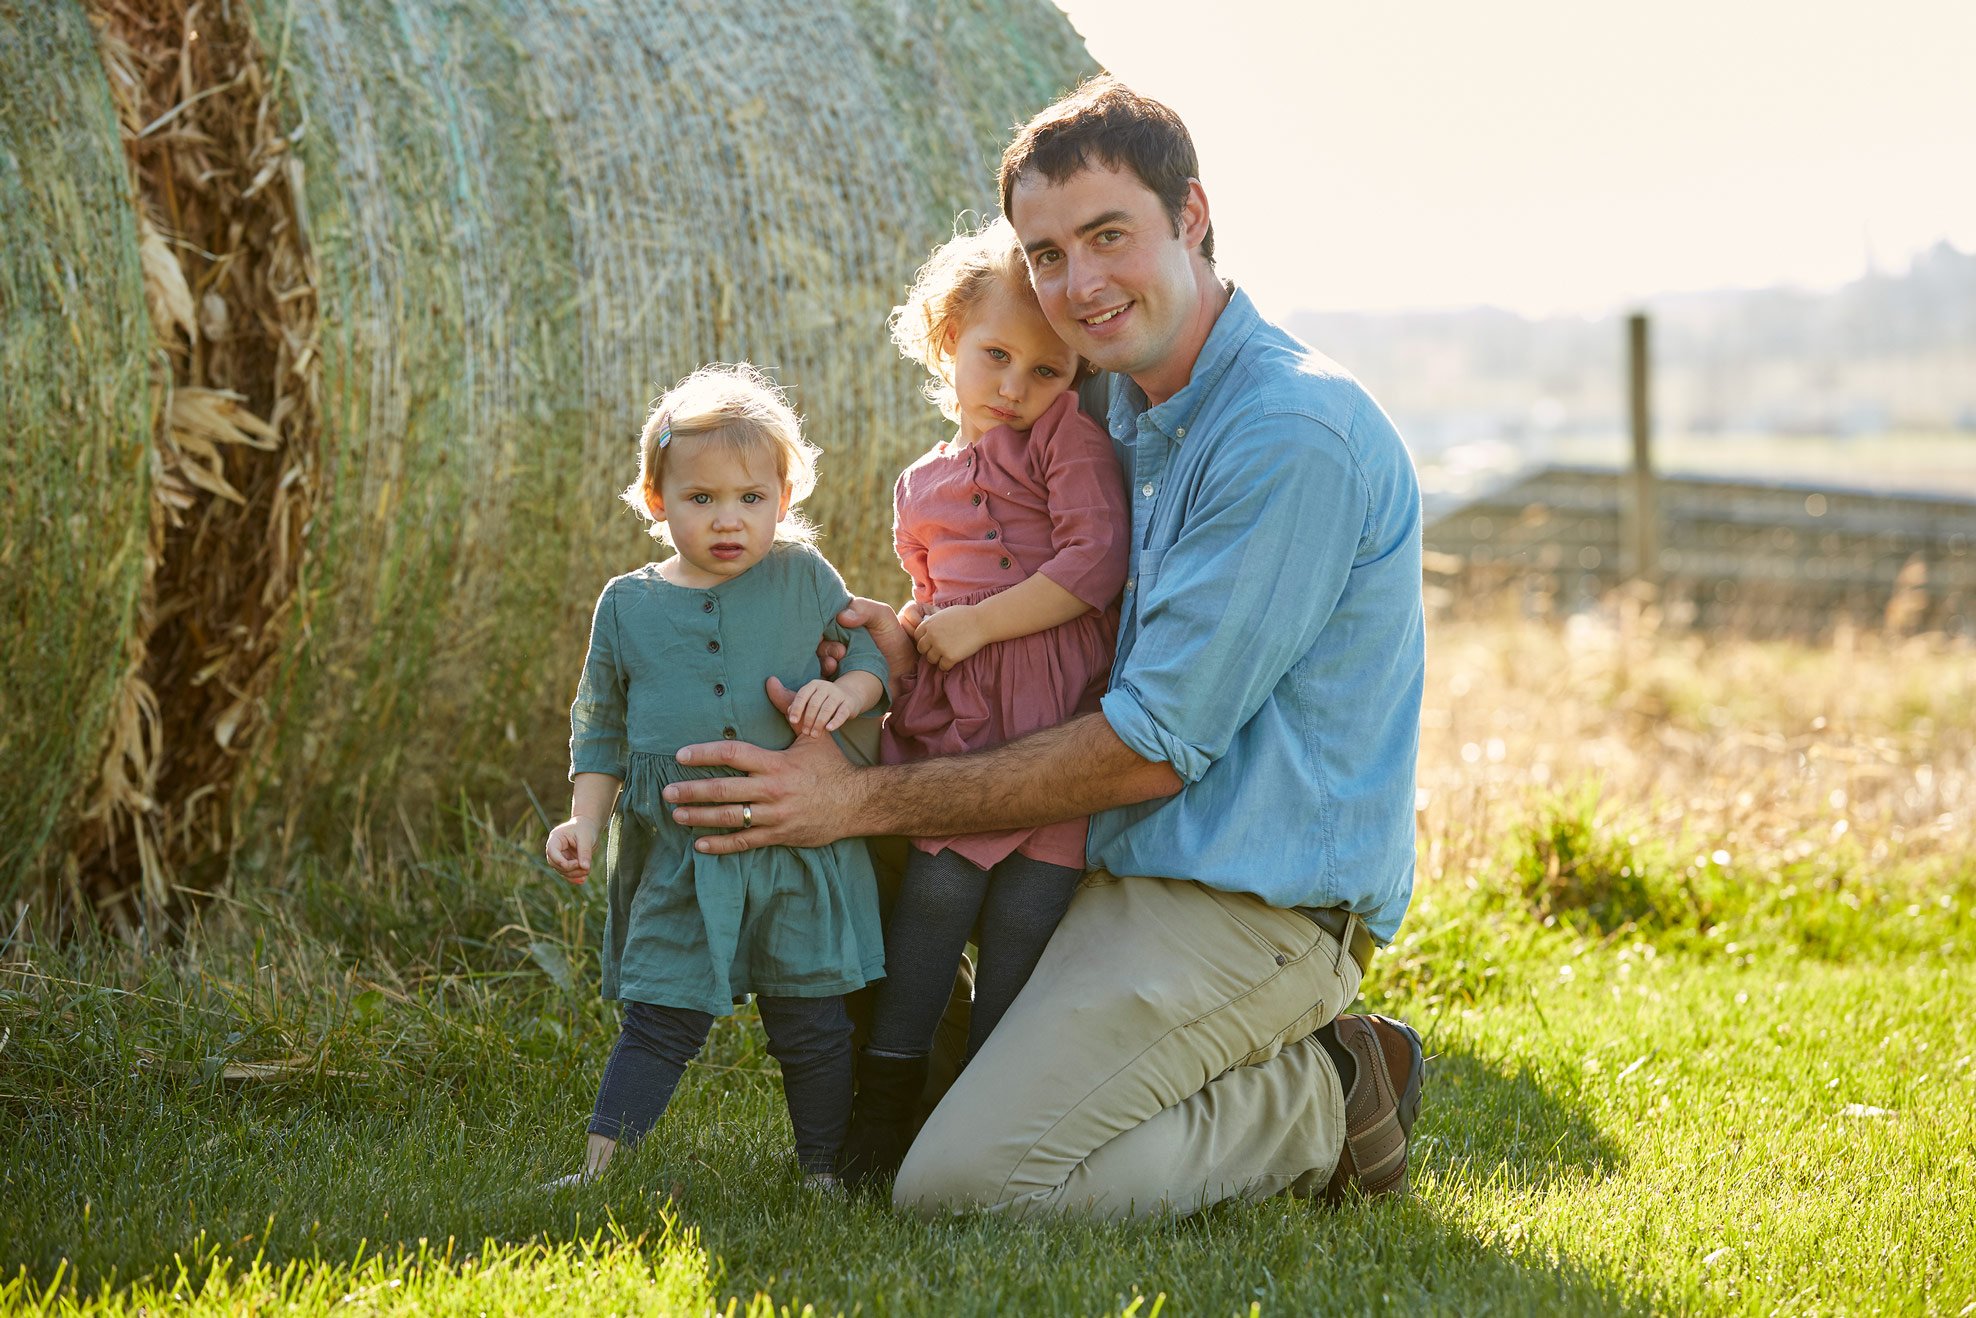 A dad with his two young daughters sitting in front of a hay bale.